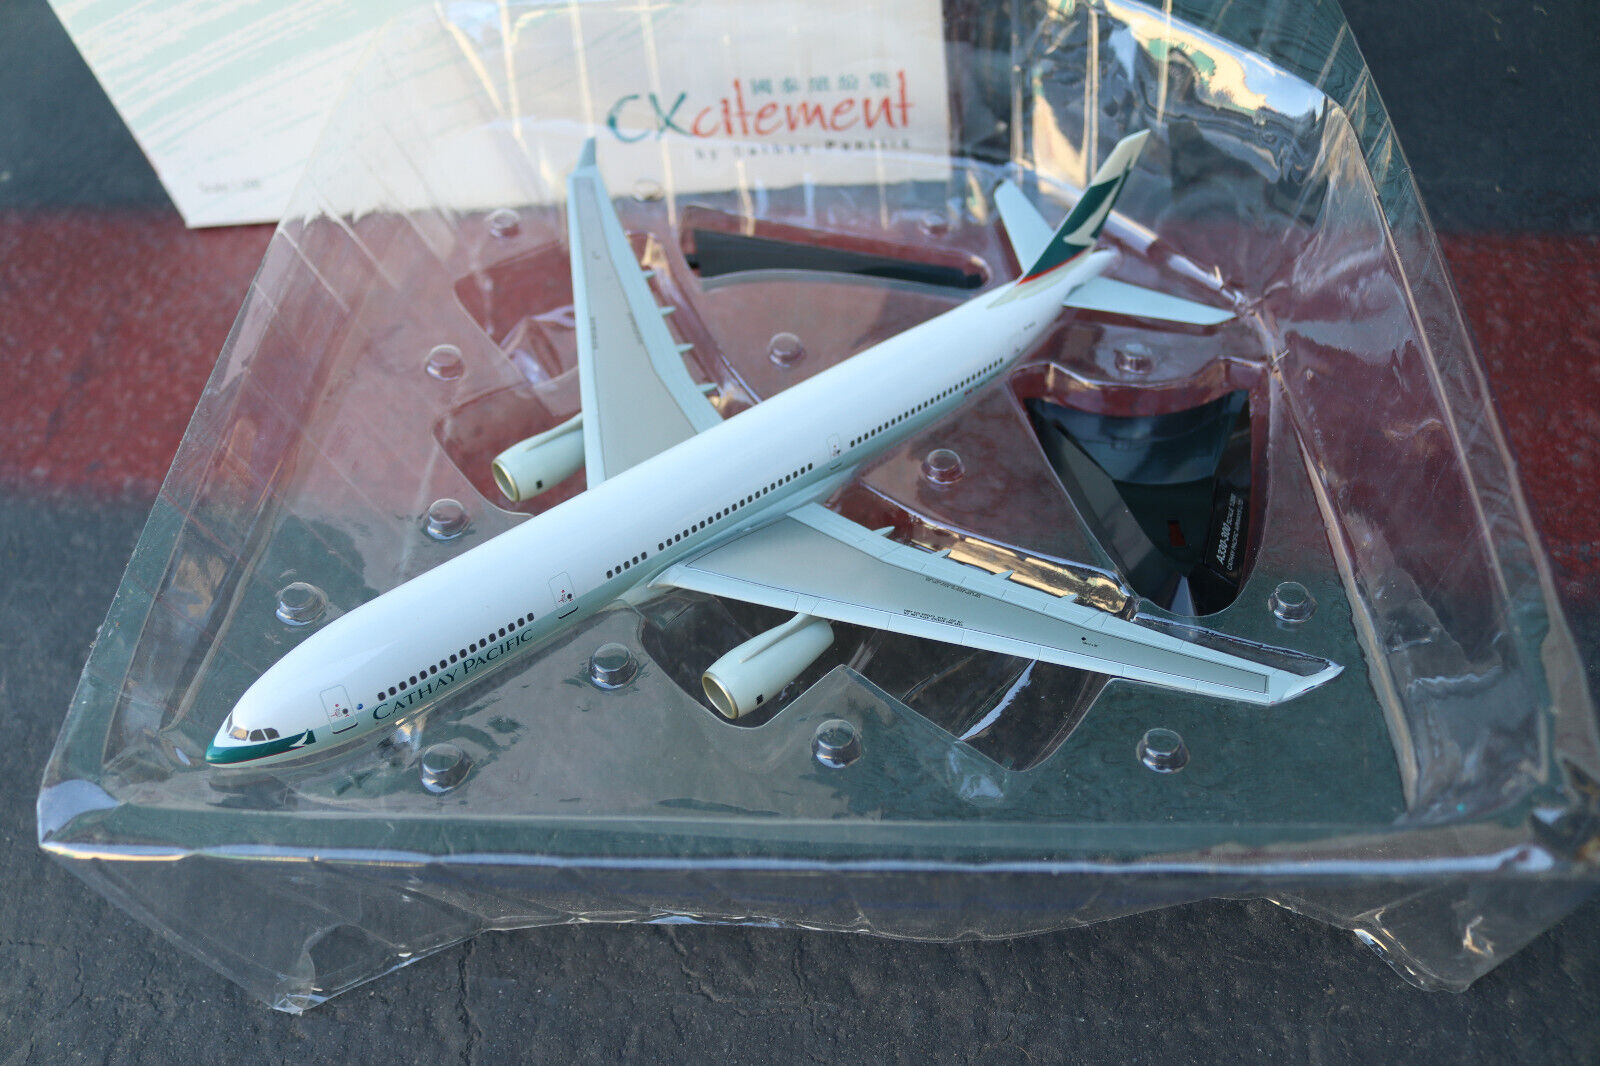 RARE CATHAY PACIFIC ONEWORLD AIRBUS A330-300 1:200 SCALE MODEL w/ STAND